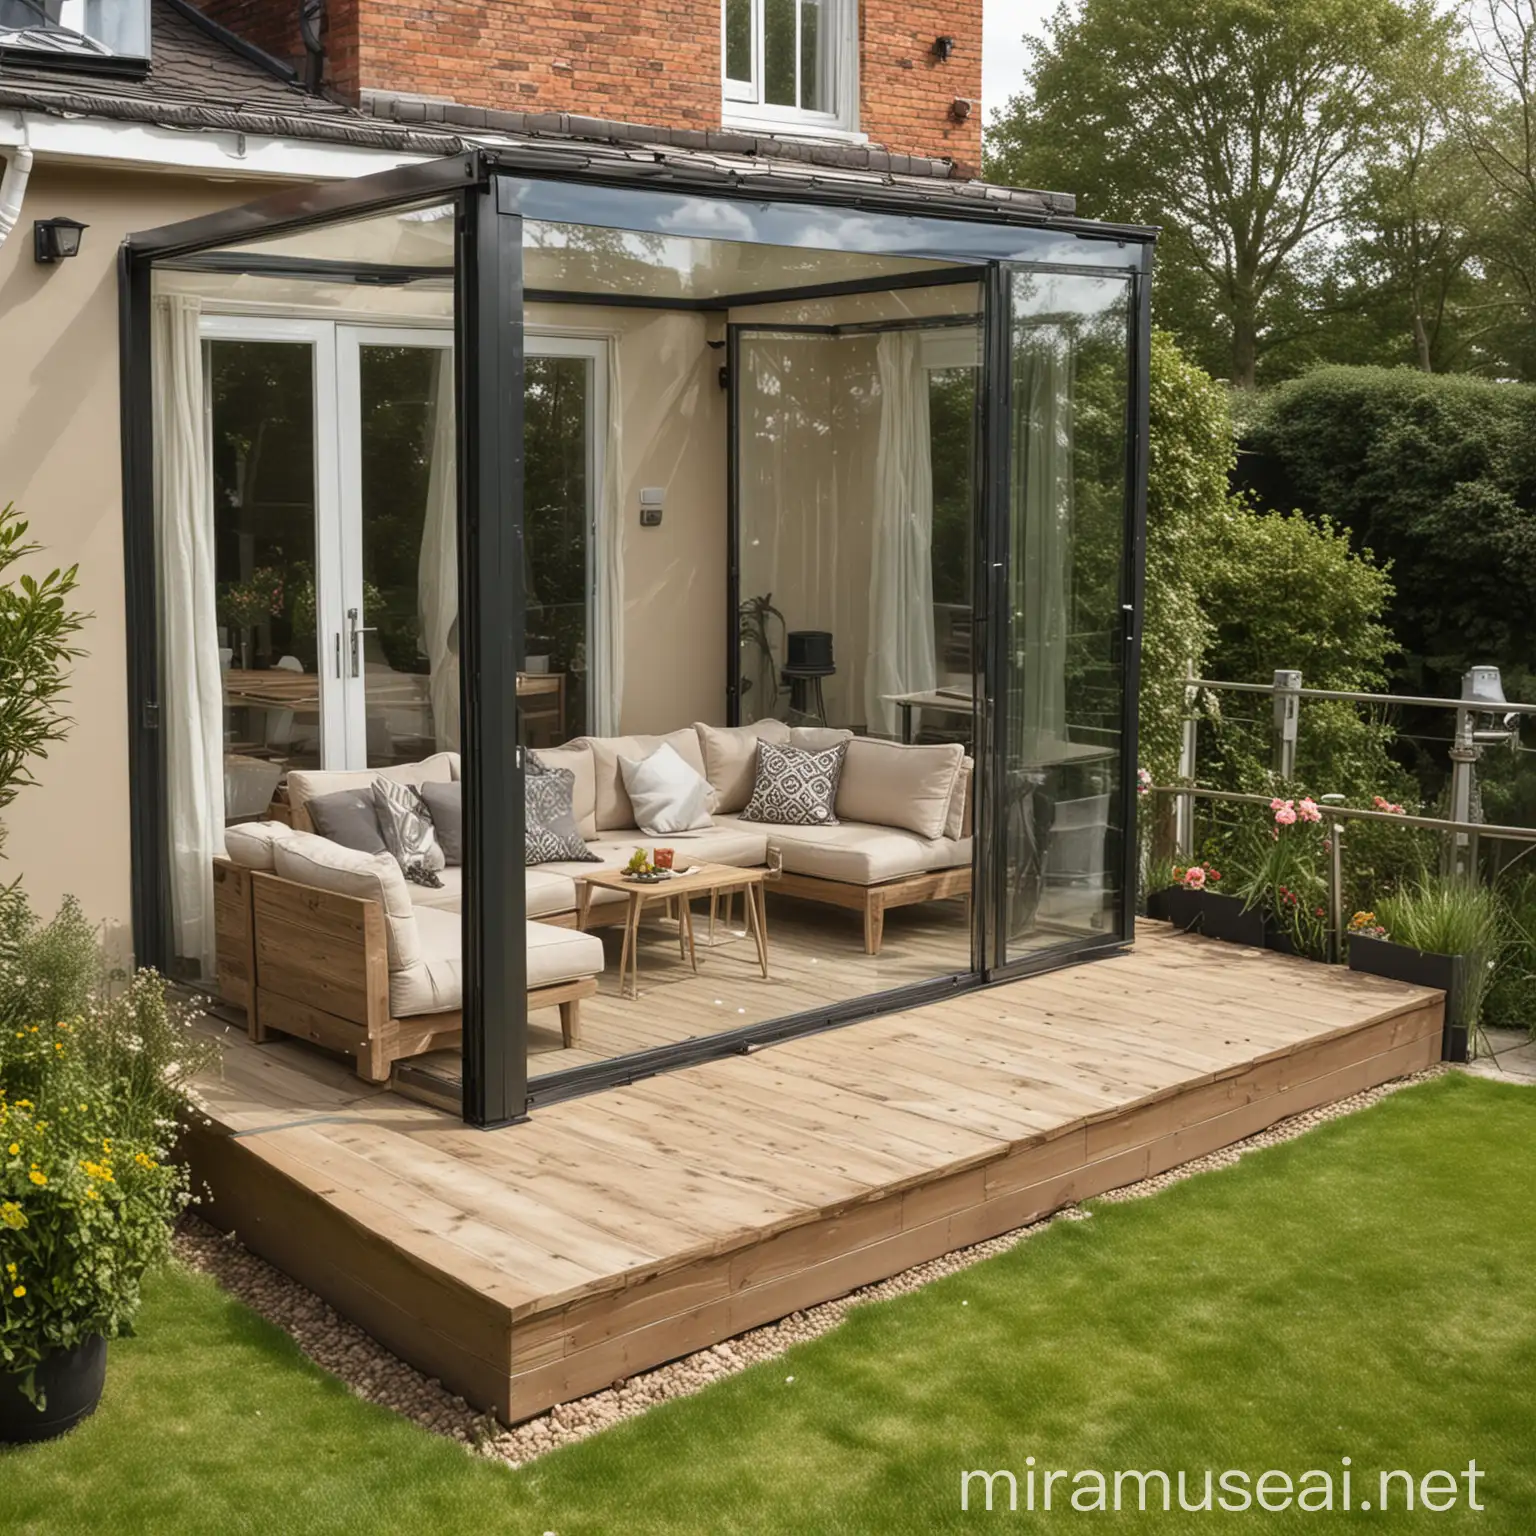 glass lean on veranda for small terrace house, step up 50cm height back garden 2.5m away from the house, light brown decking, sunny day, outdoor L shape sofa seating, superb landscaping design